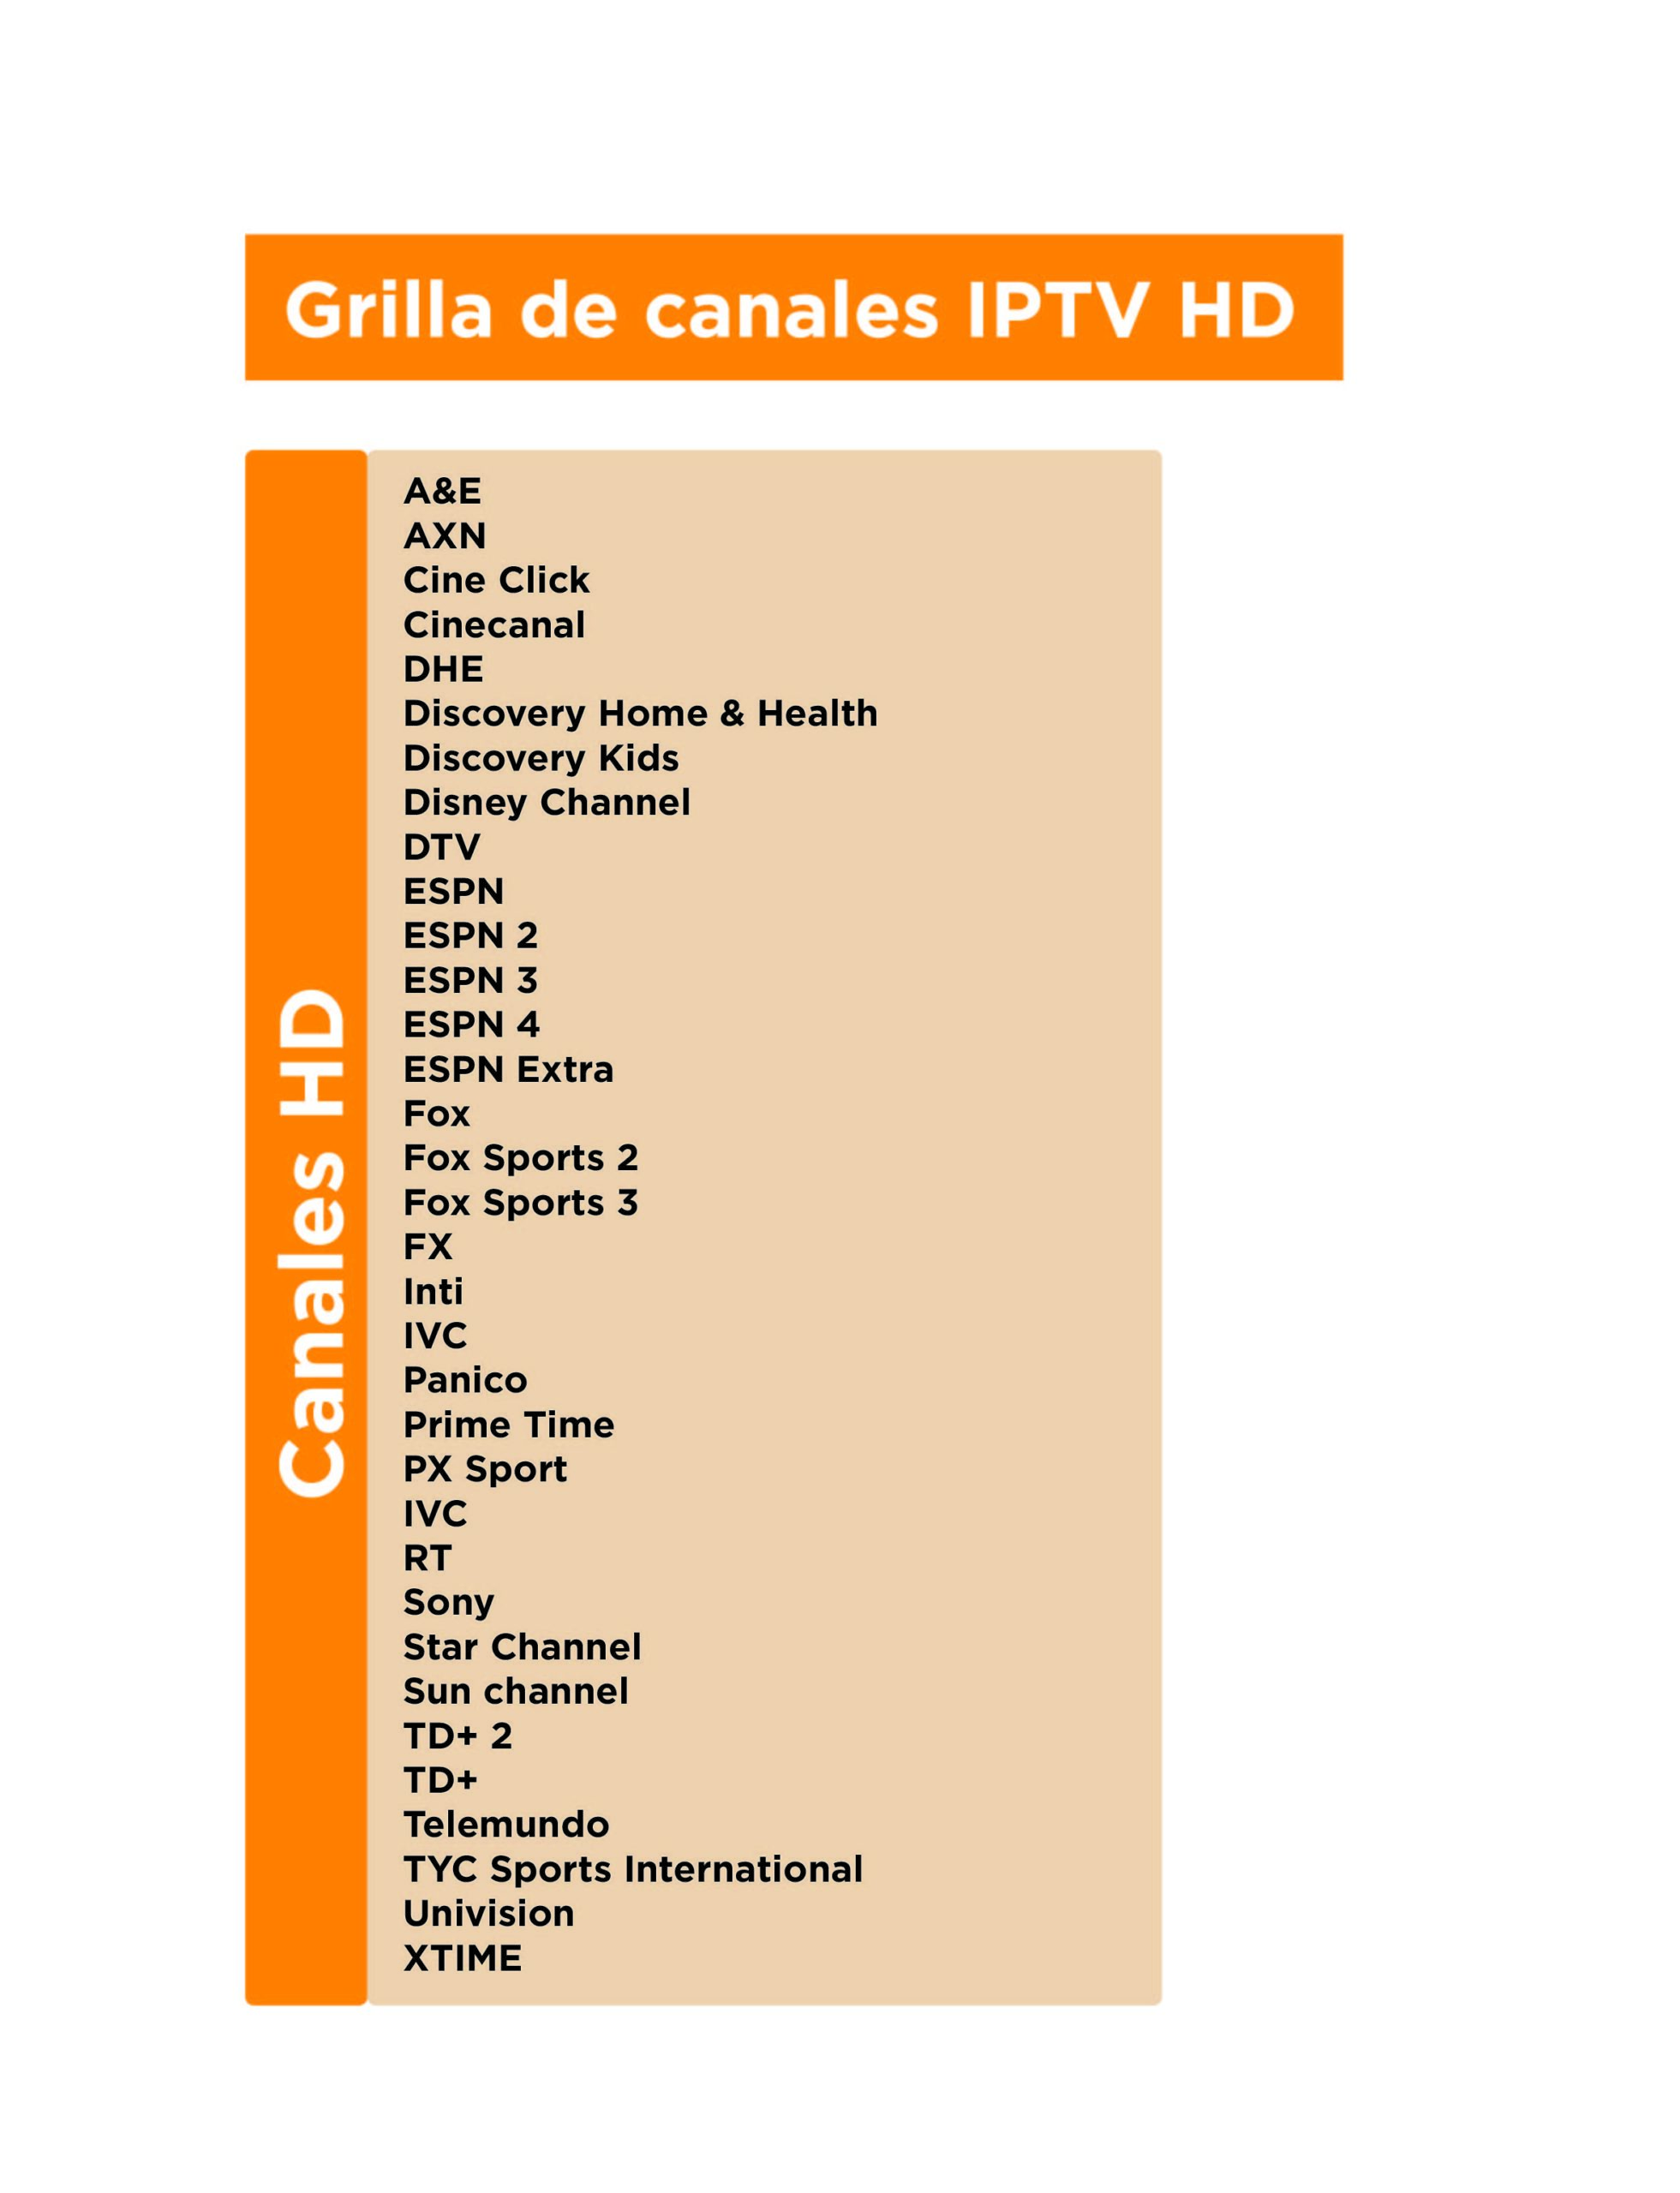 Canales HD Navégalo IPTV